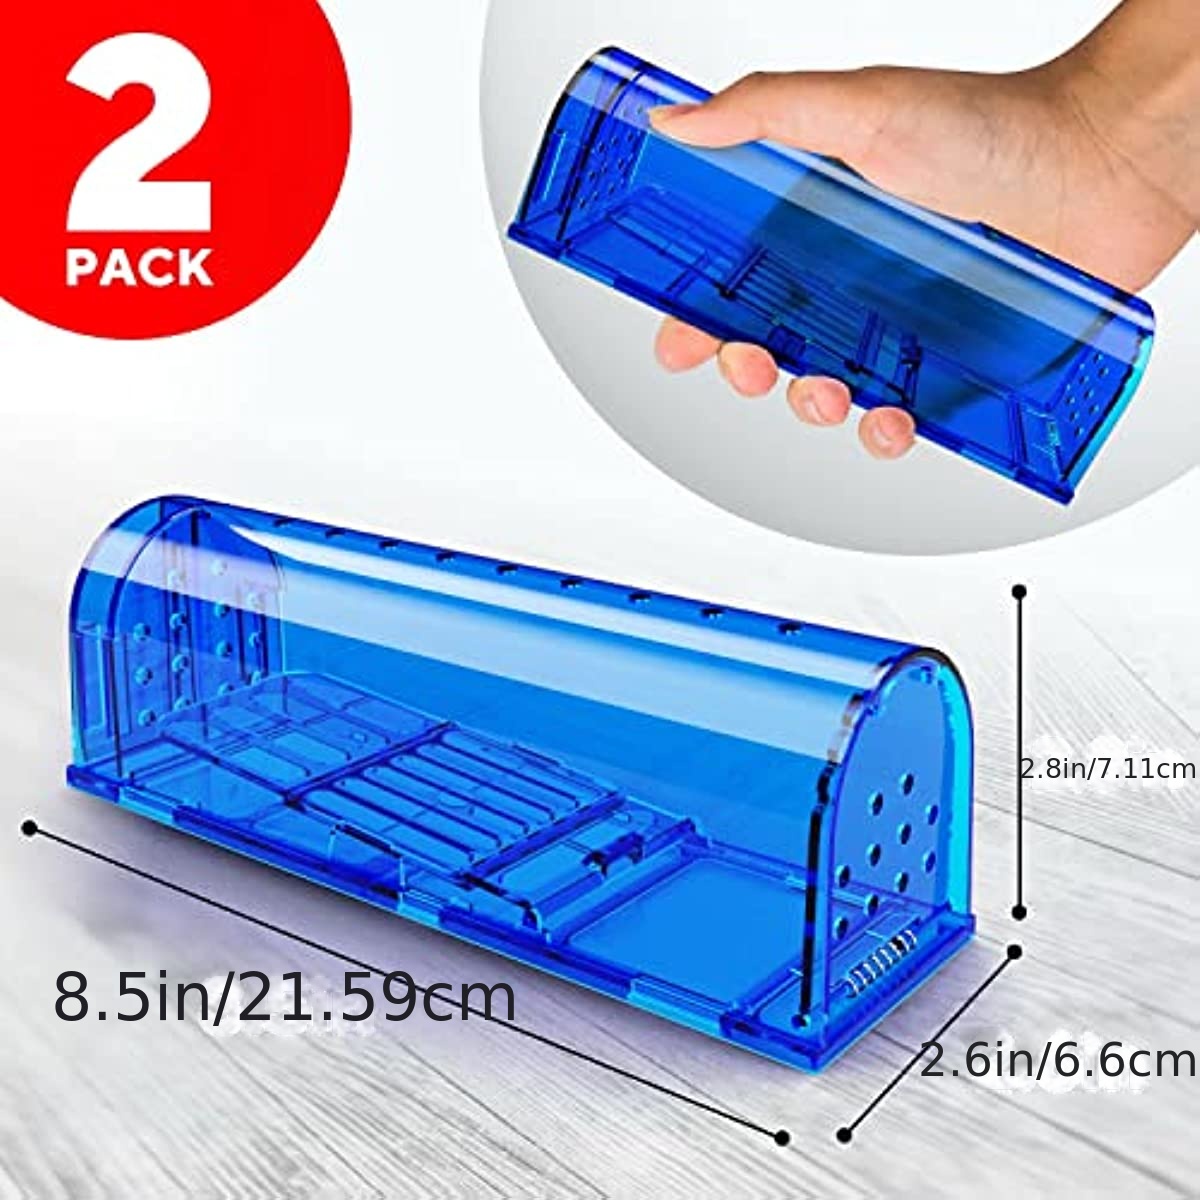 Humane Catch and Release Indoor/Outdoor Mouse Traps Pack of 2 - Easy Set  Durable Traps, Safe for Children, Pets and Humans - Instantly Remove  Unwanted